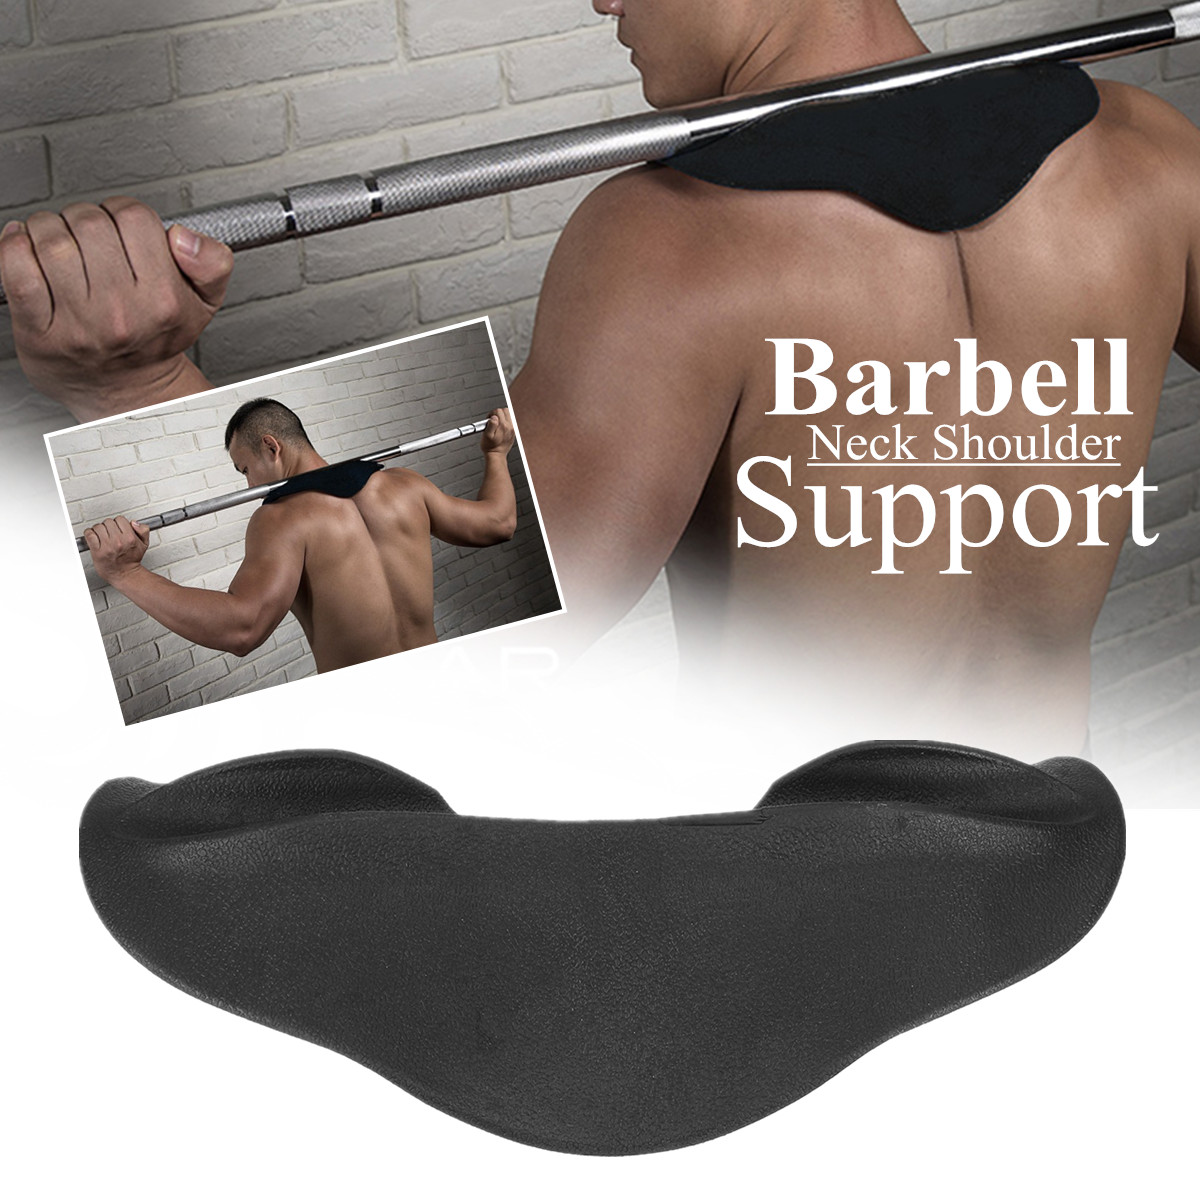 TPE-Weightlifting-Squat-Pad-Neck-Shoulder-Support-Sports-Barbell-Gym-Protector-1213093-1